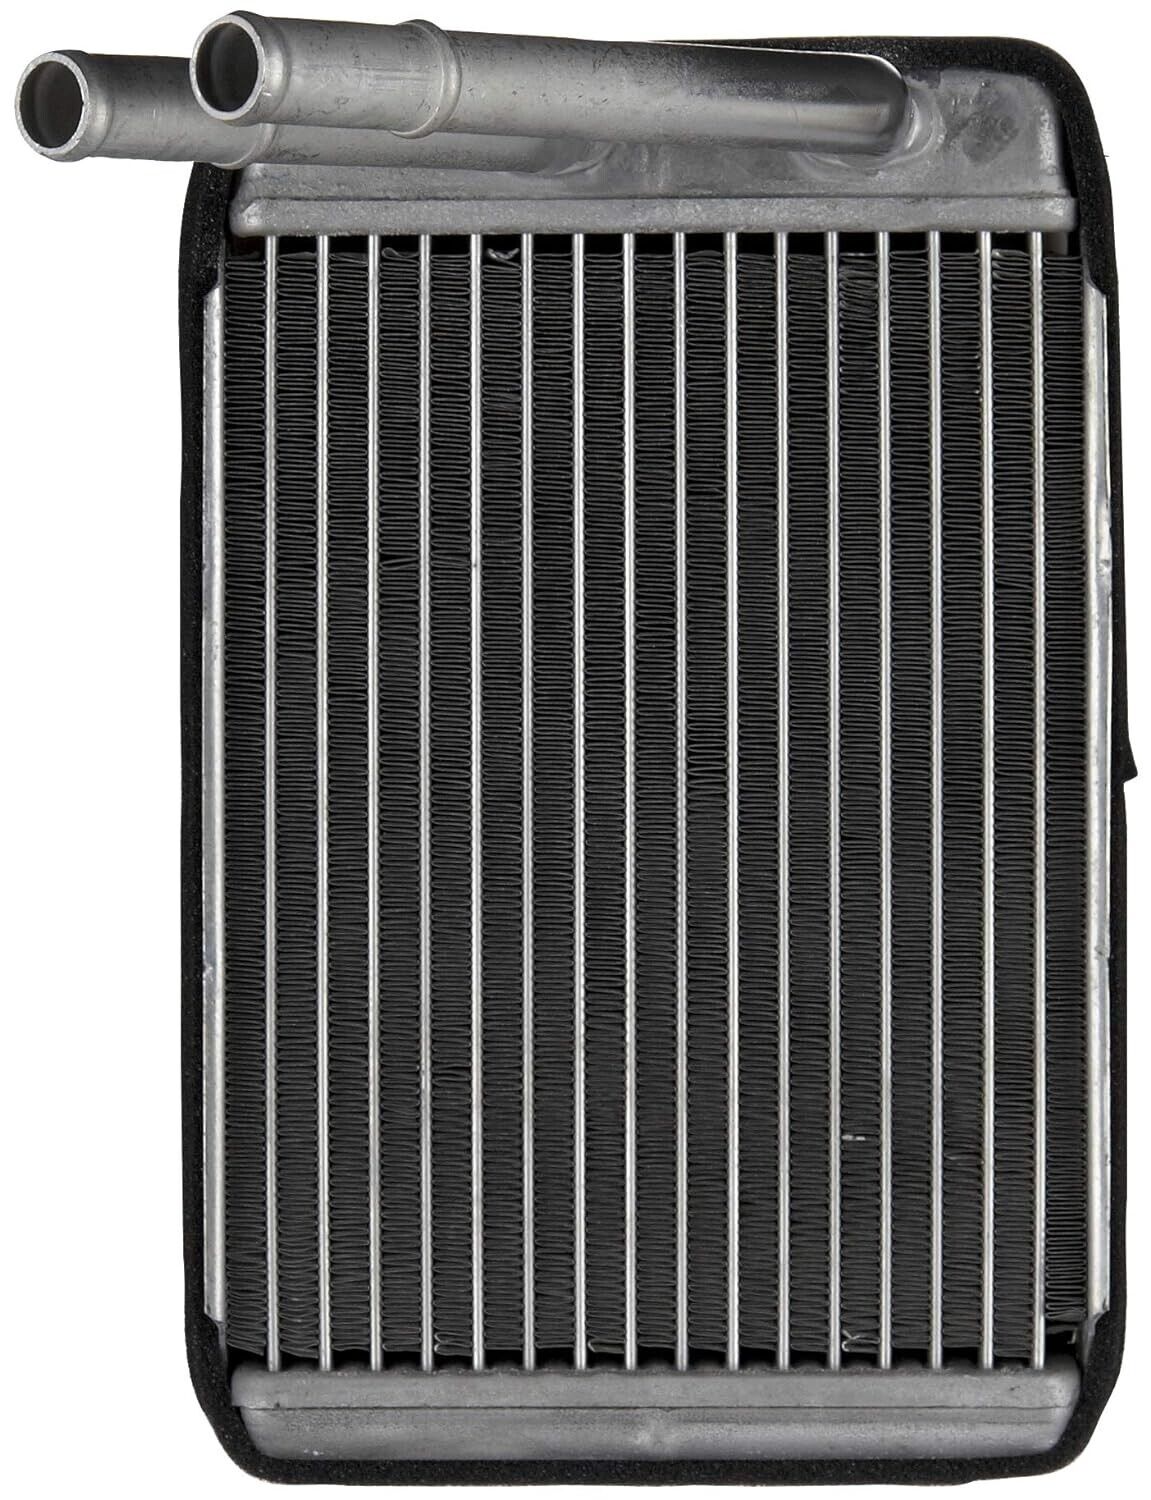 Replacement REPF503006 Heater Core 9310 For 1995-2001 Ford Explorer